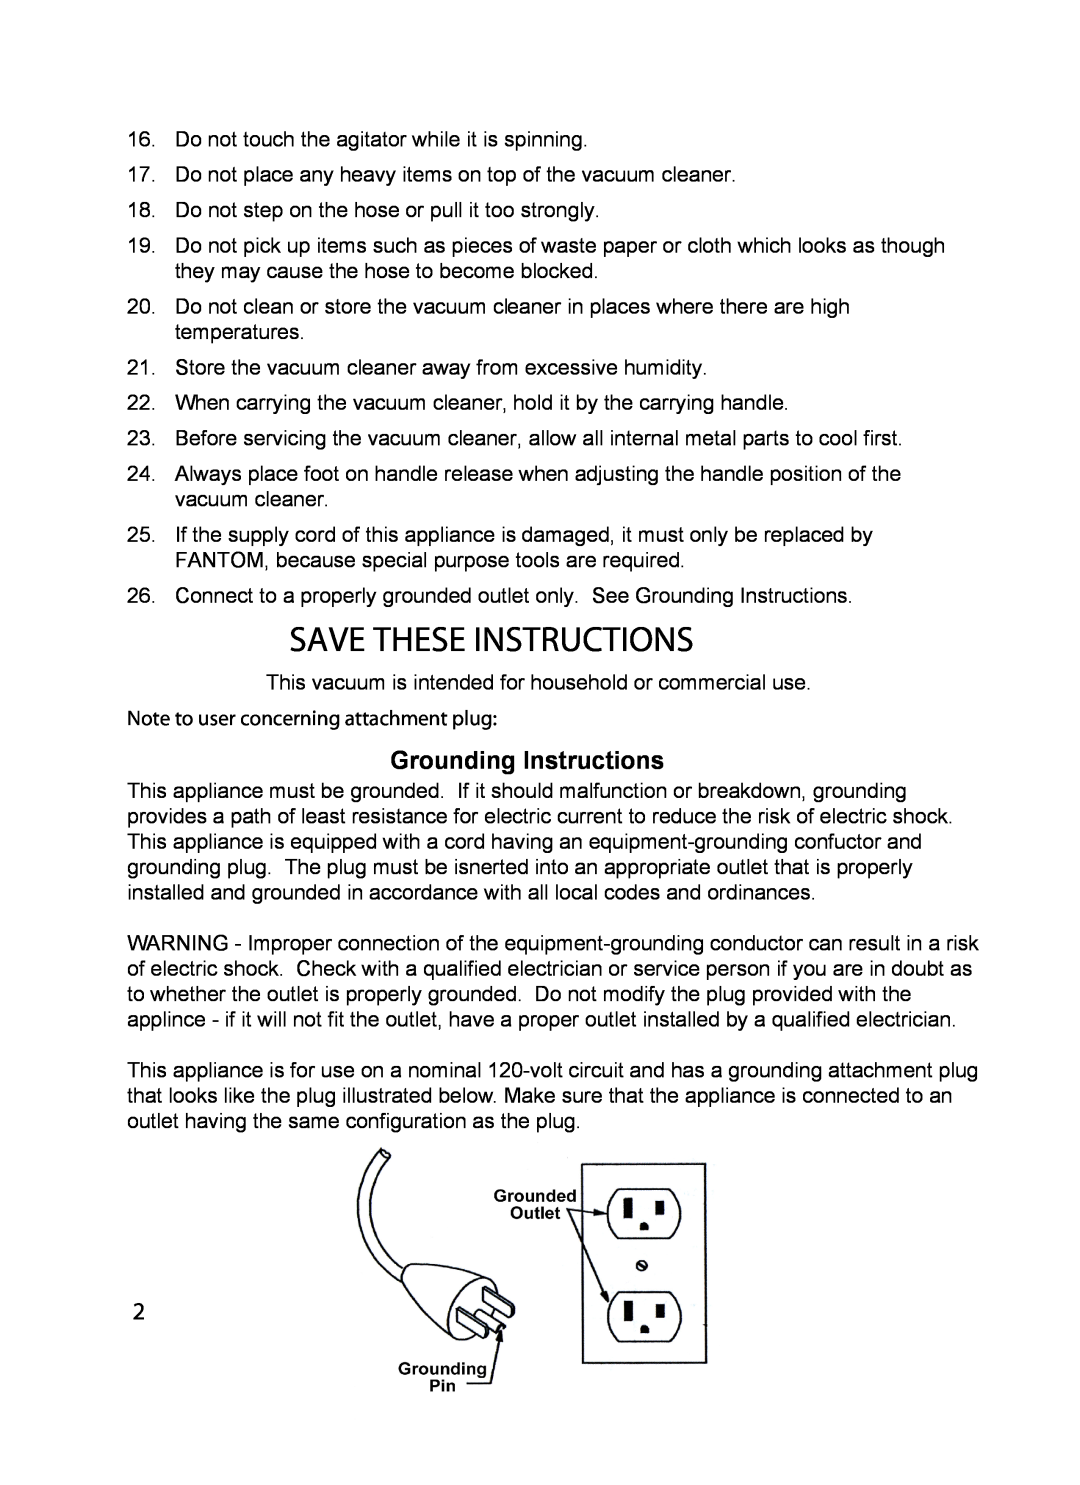 Fantom Vacuum FM655CS Save These Instructions, Grounding Instructions, Note to user concerning attachment plug 